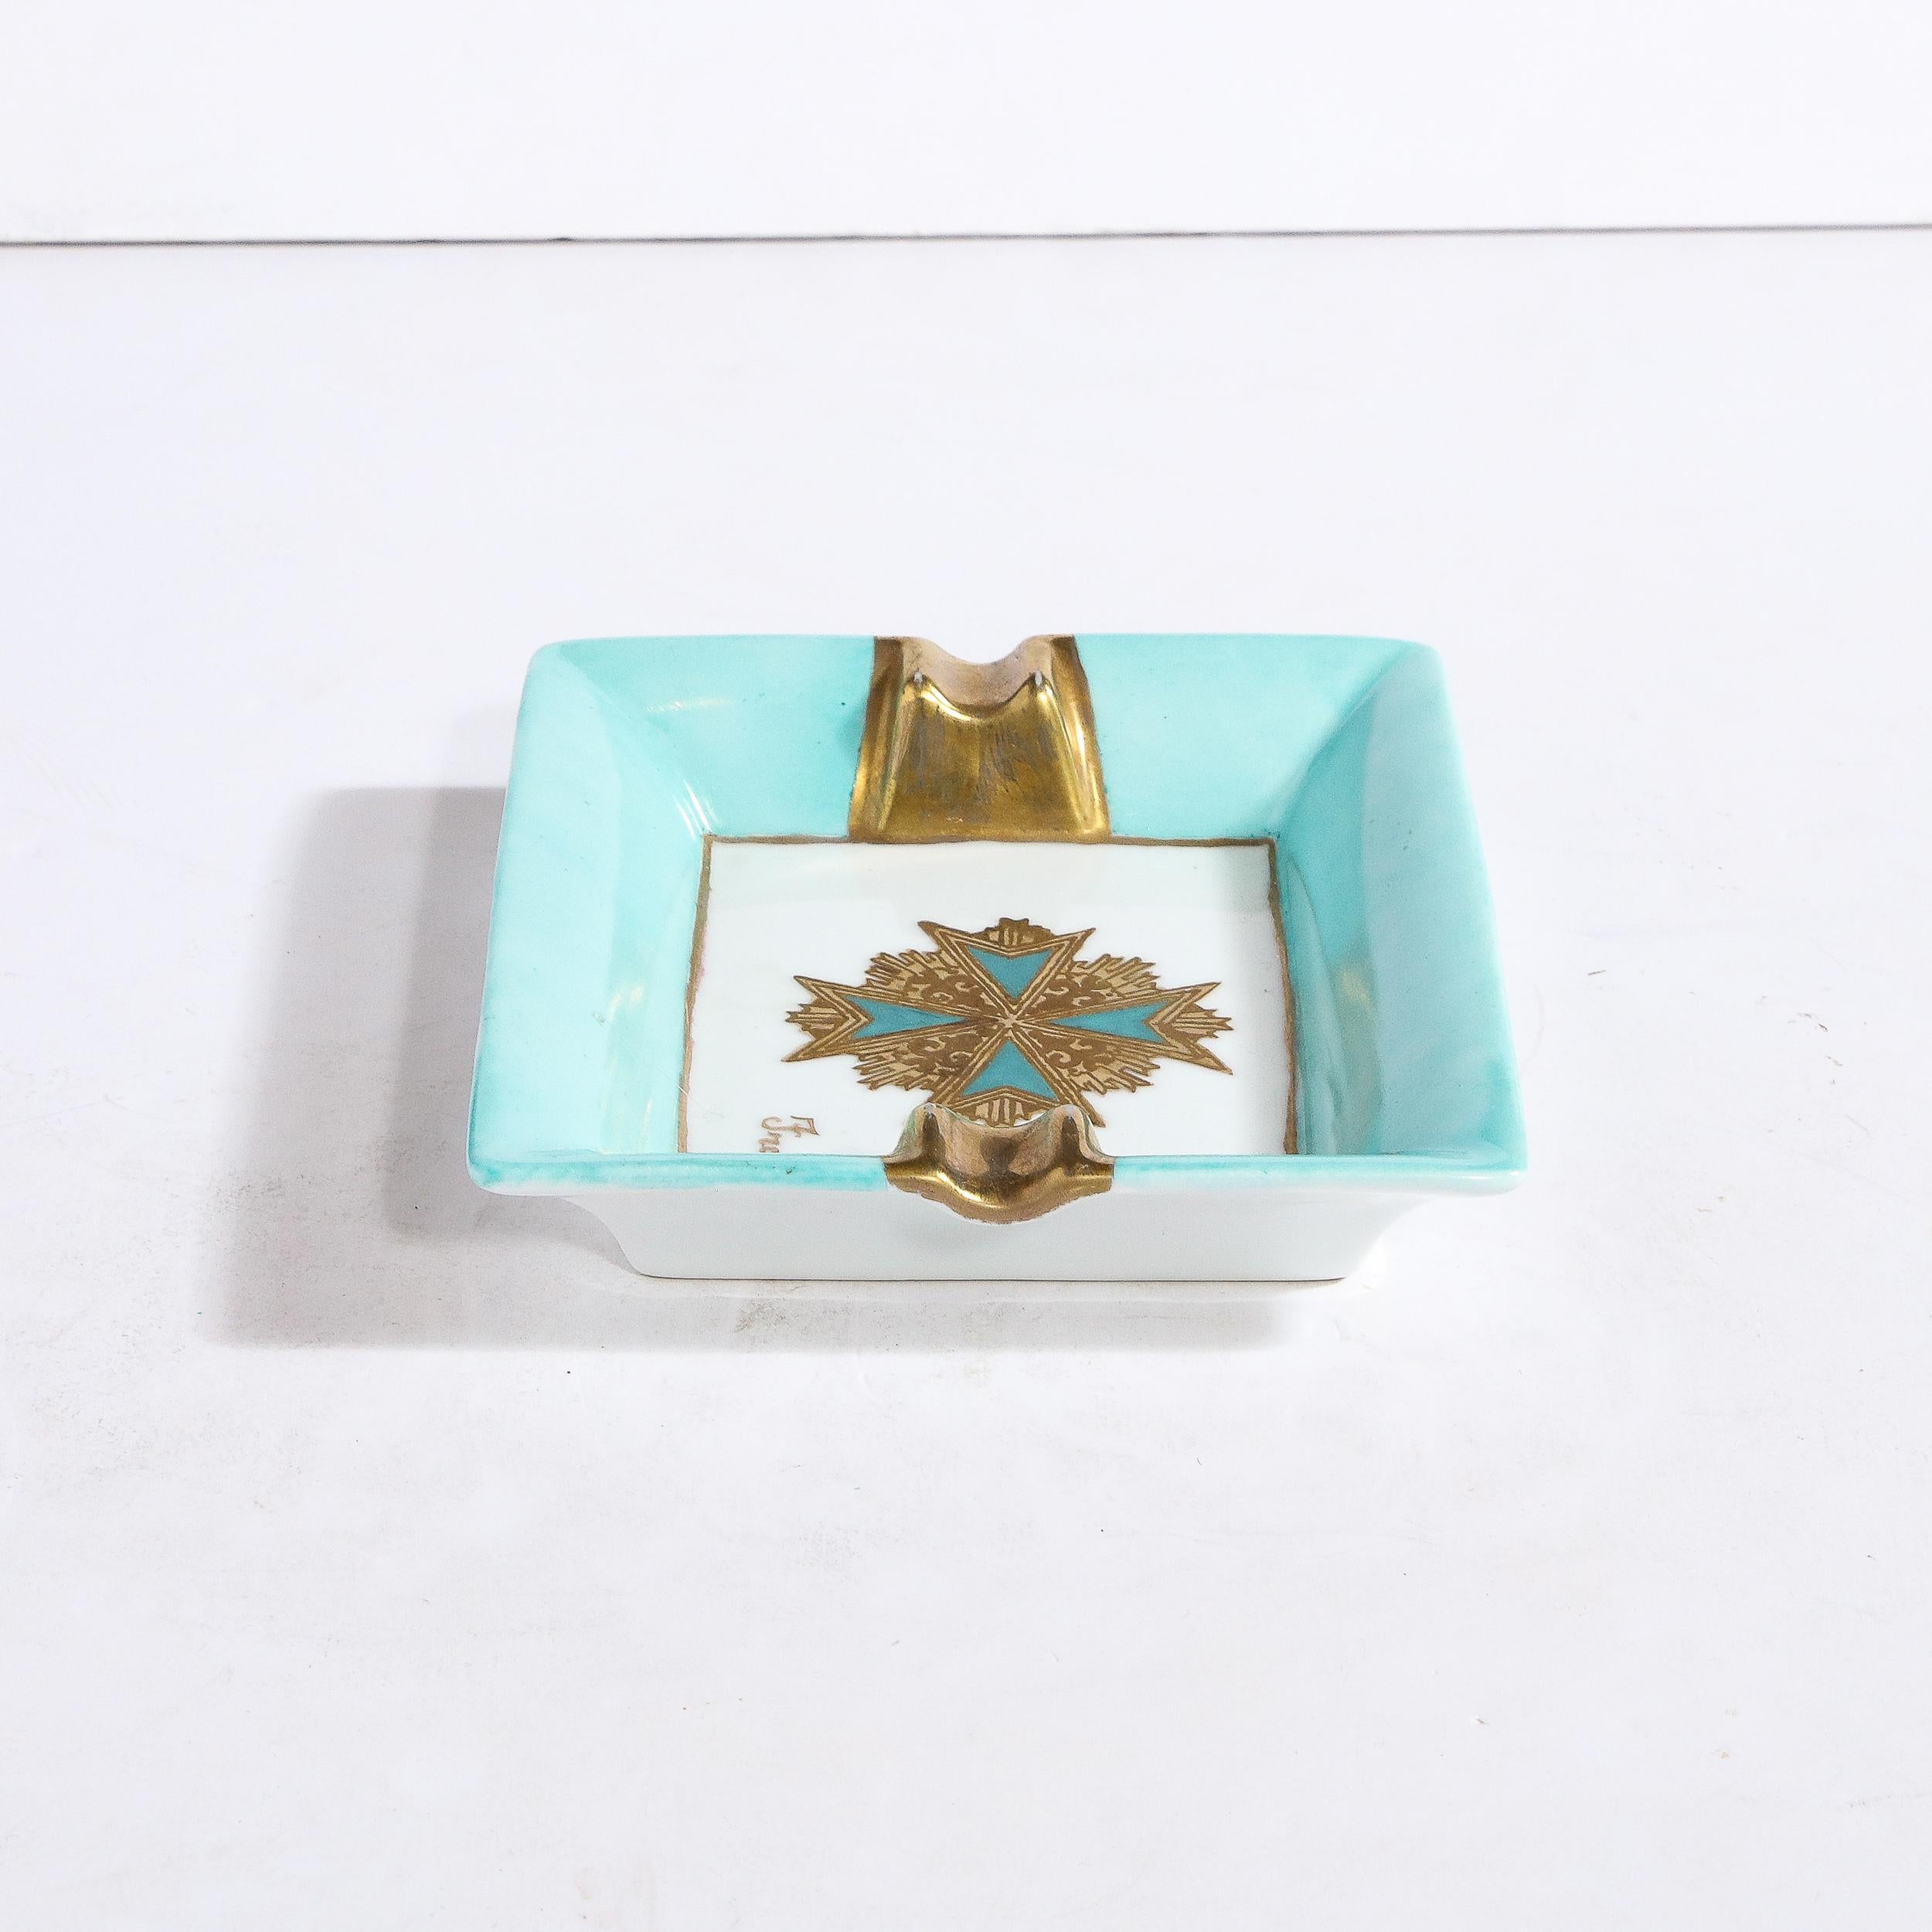 Mid-Century Modern Ceramic Decorative Tray in Pastel Turquoise & Gilt Detailing  For Sale 3